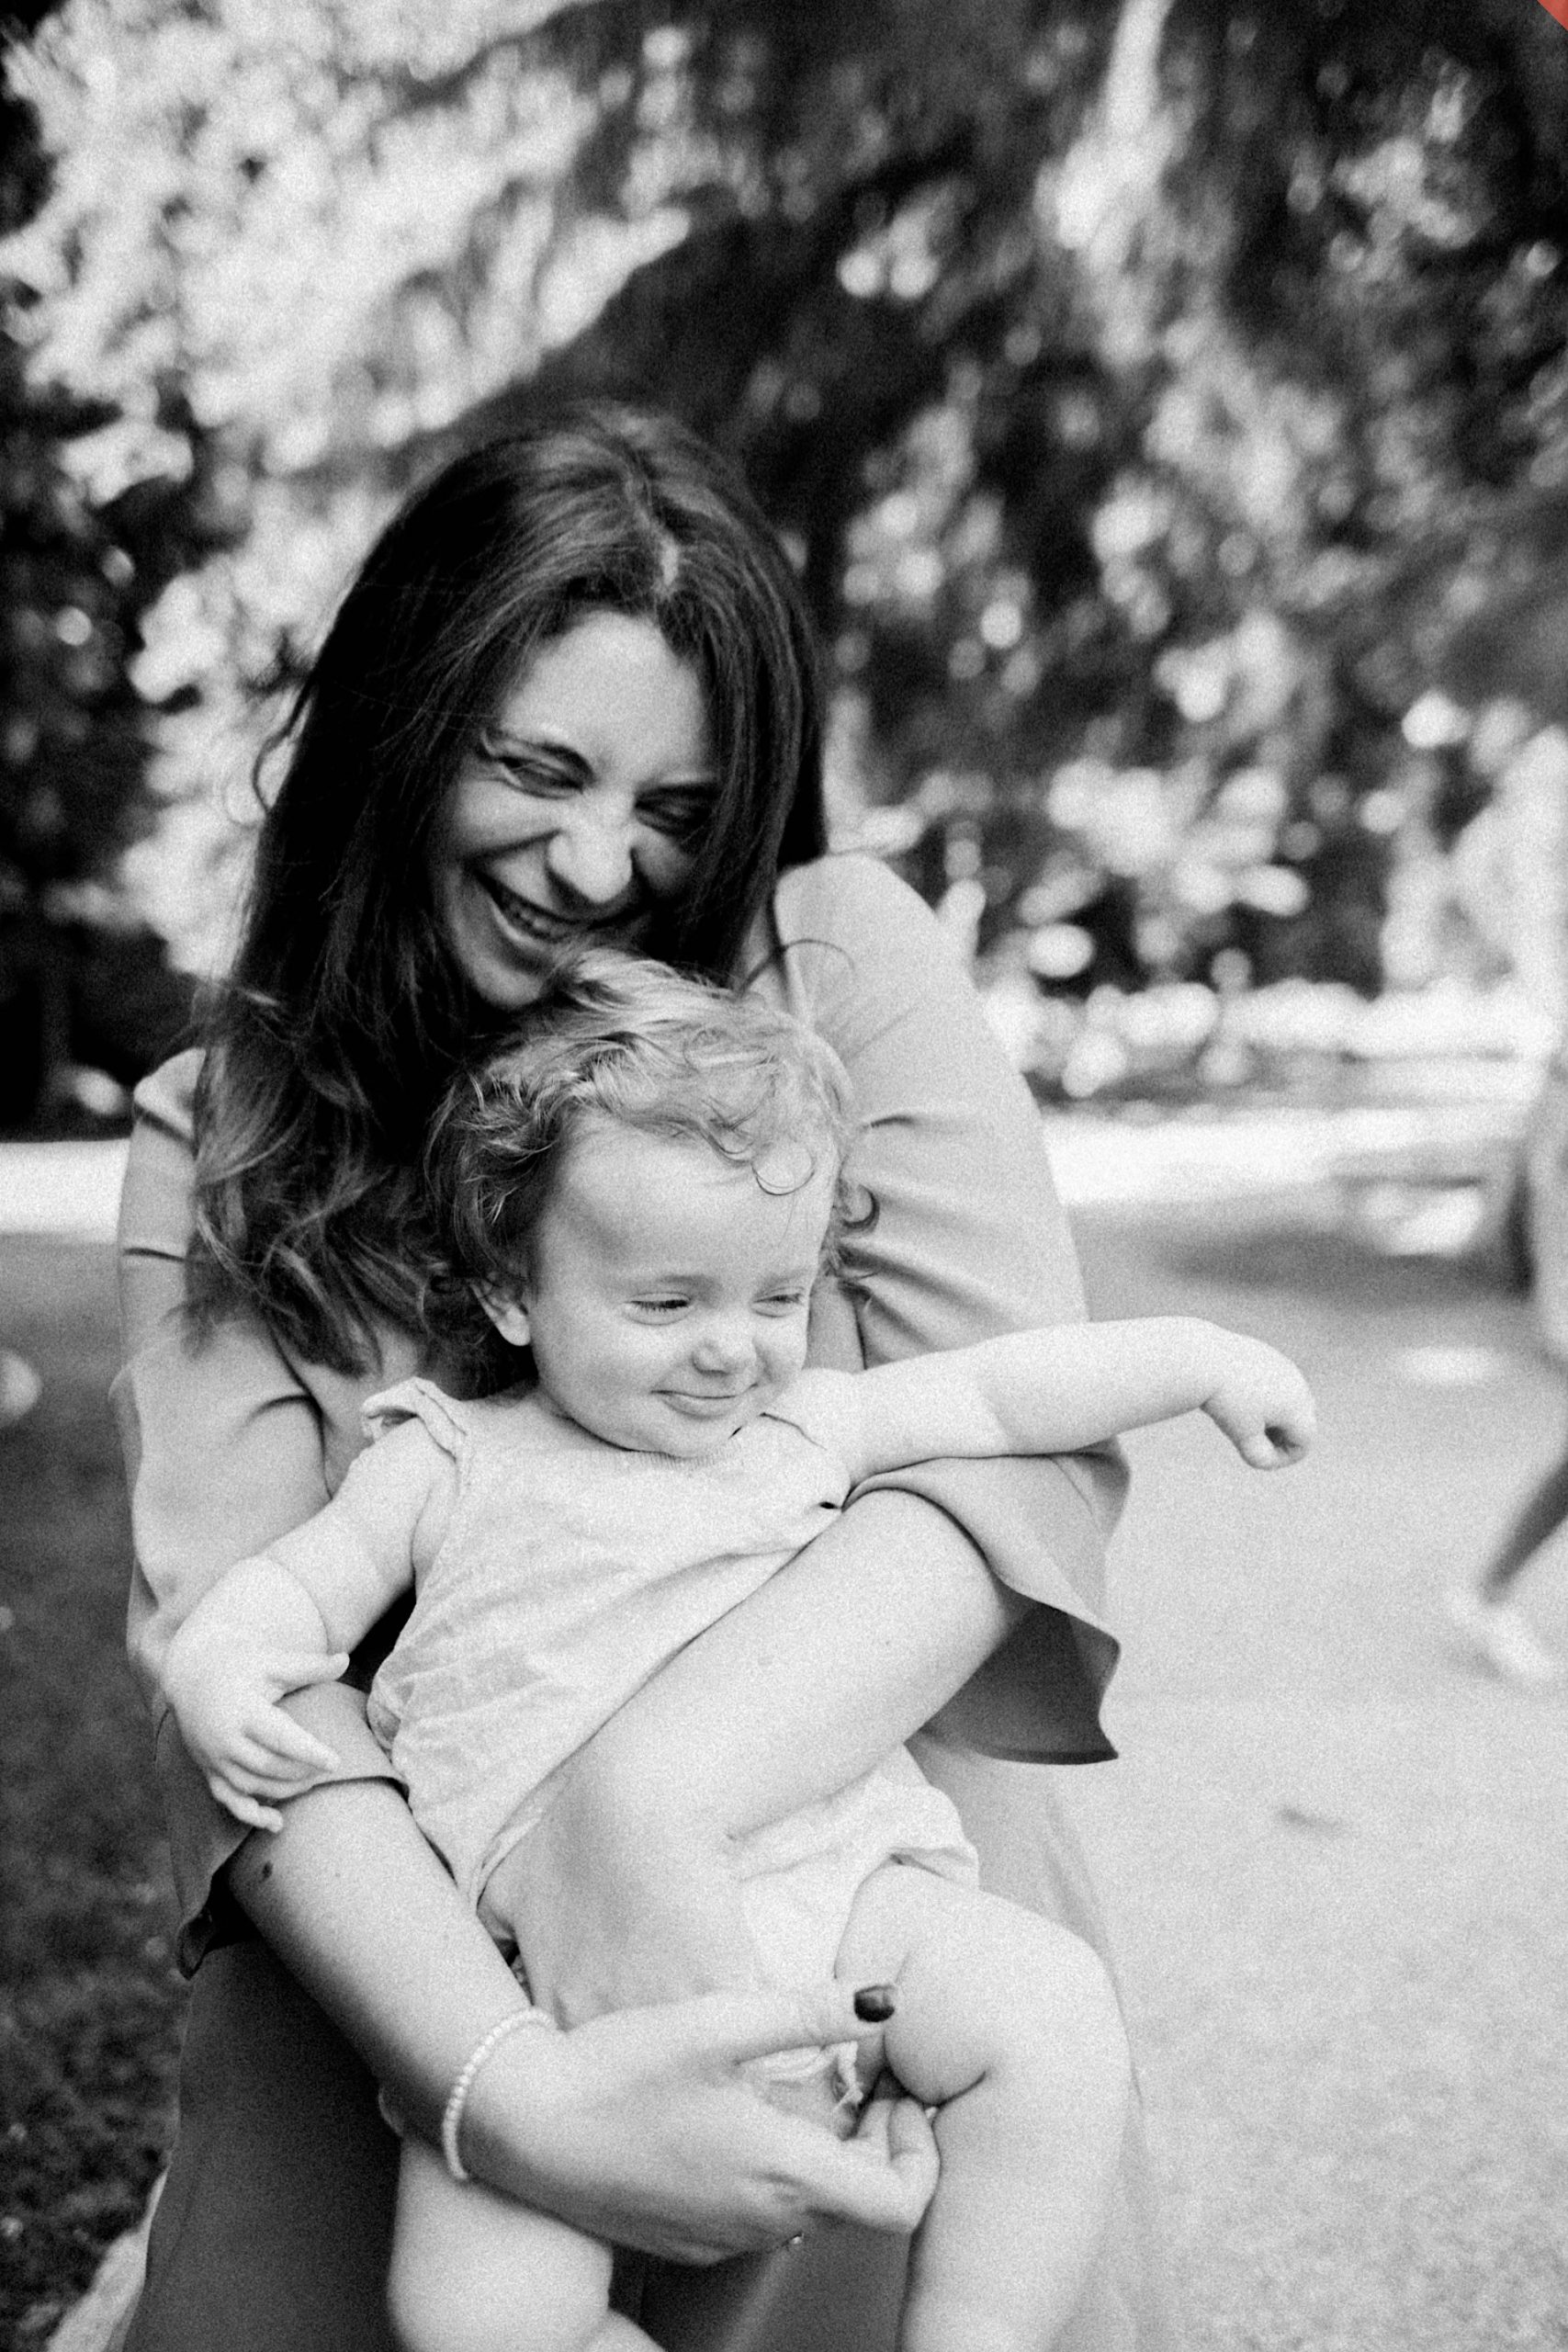 Black & white Monza Family Photography of a Mum holding her baby girl, both of them laughing.